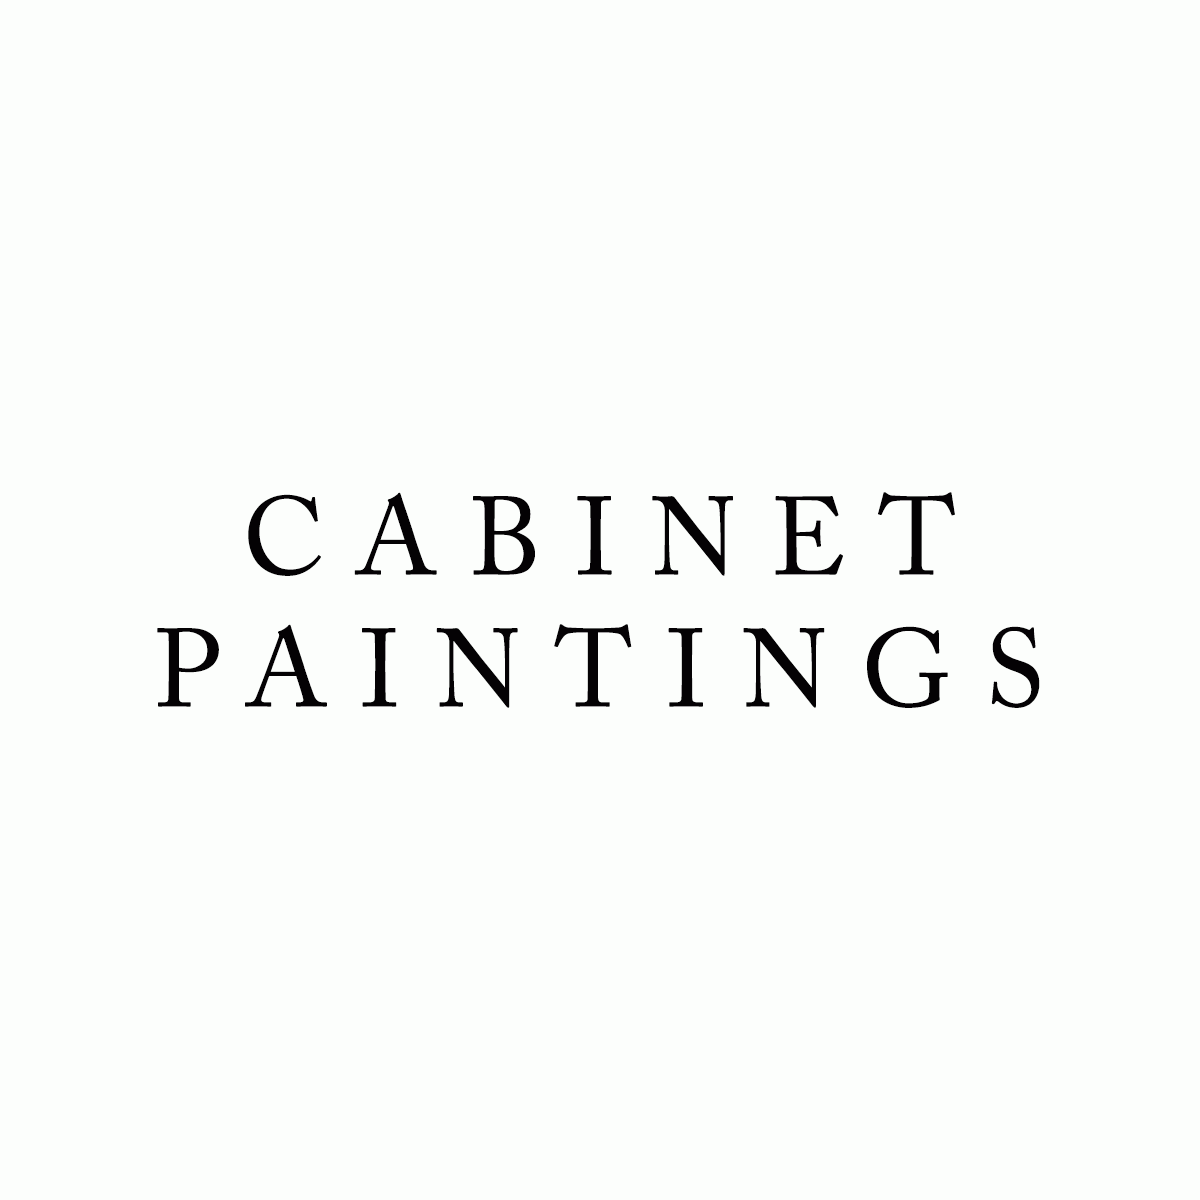 Cabinet Paintings